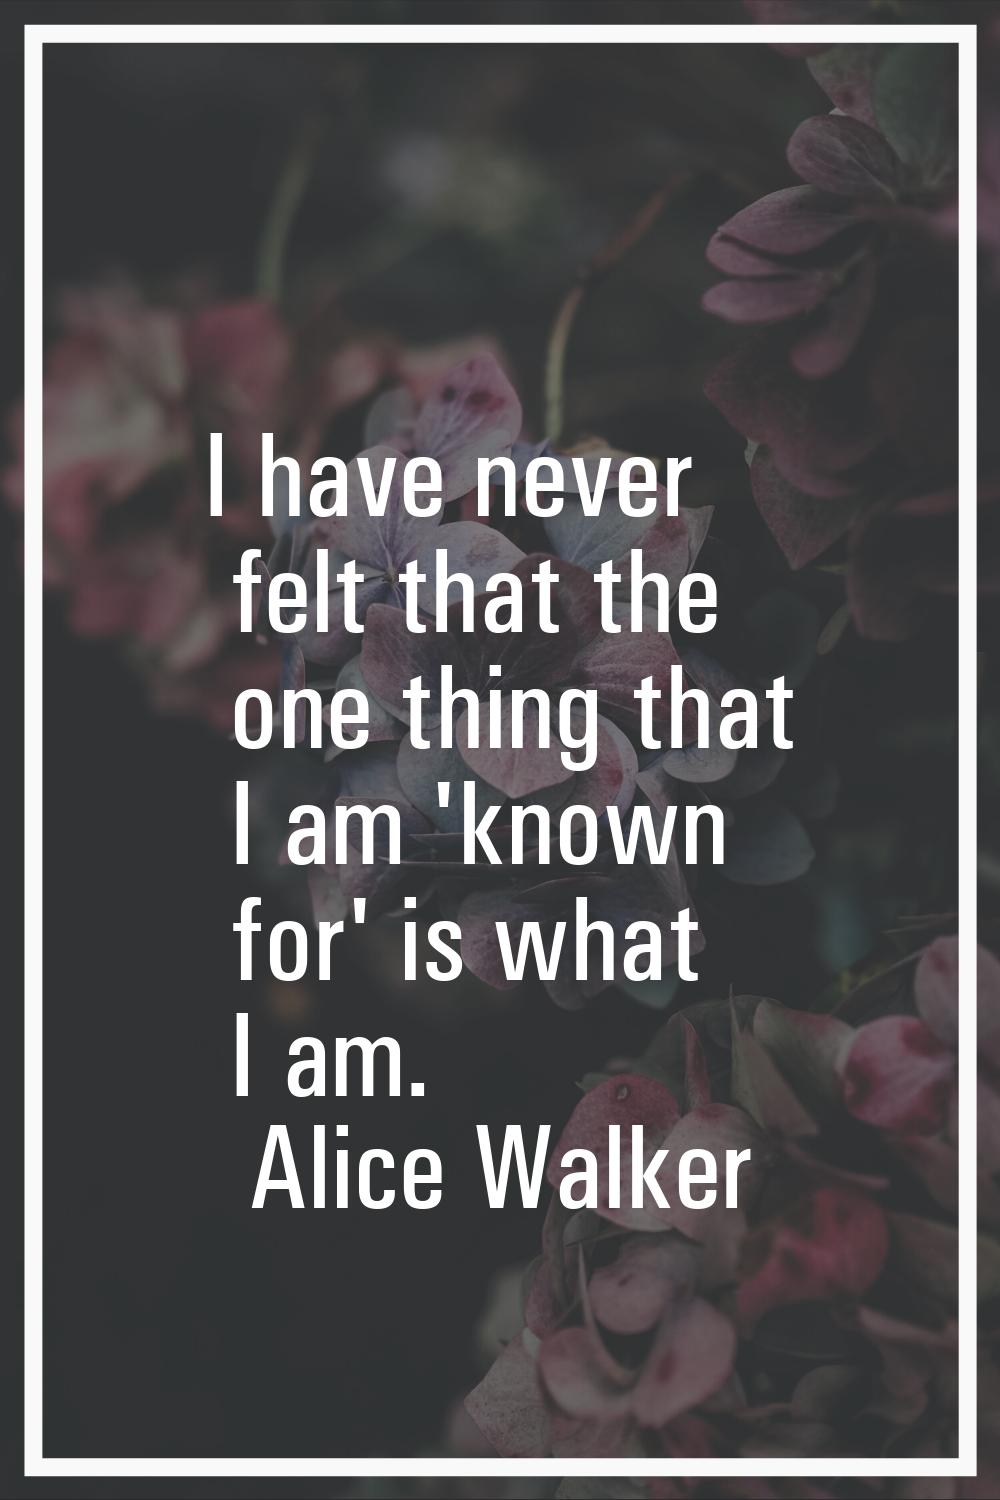 I have never felt that the one thing that I am 'known for' is what I am.